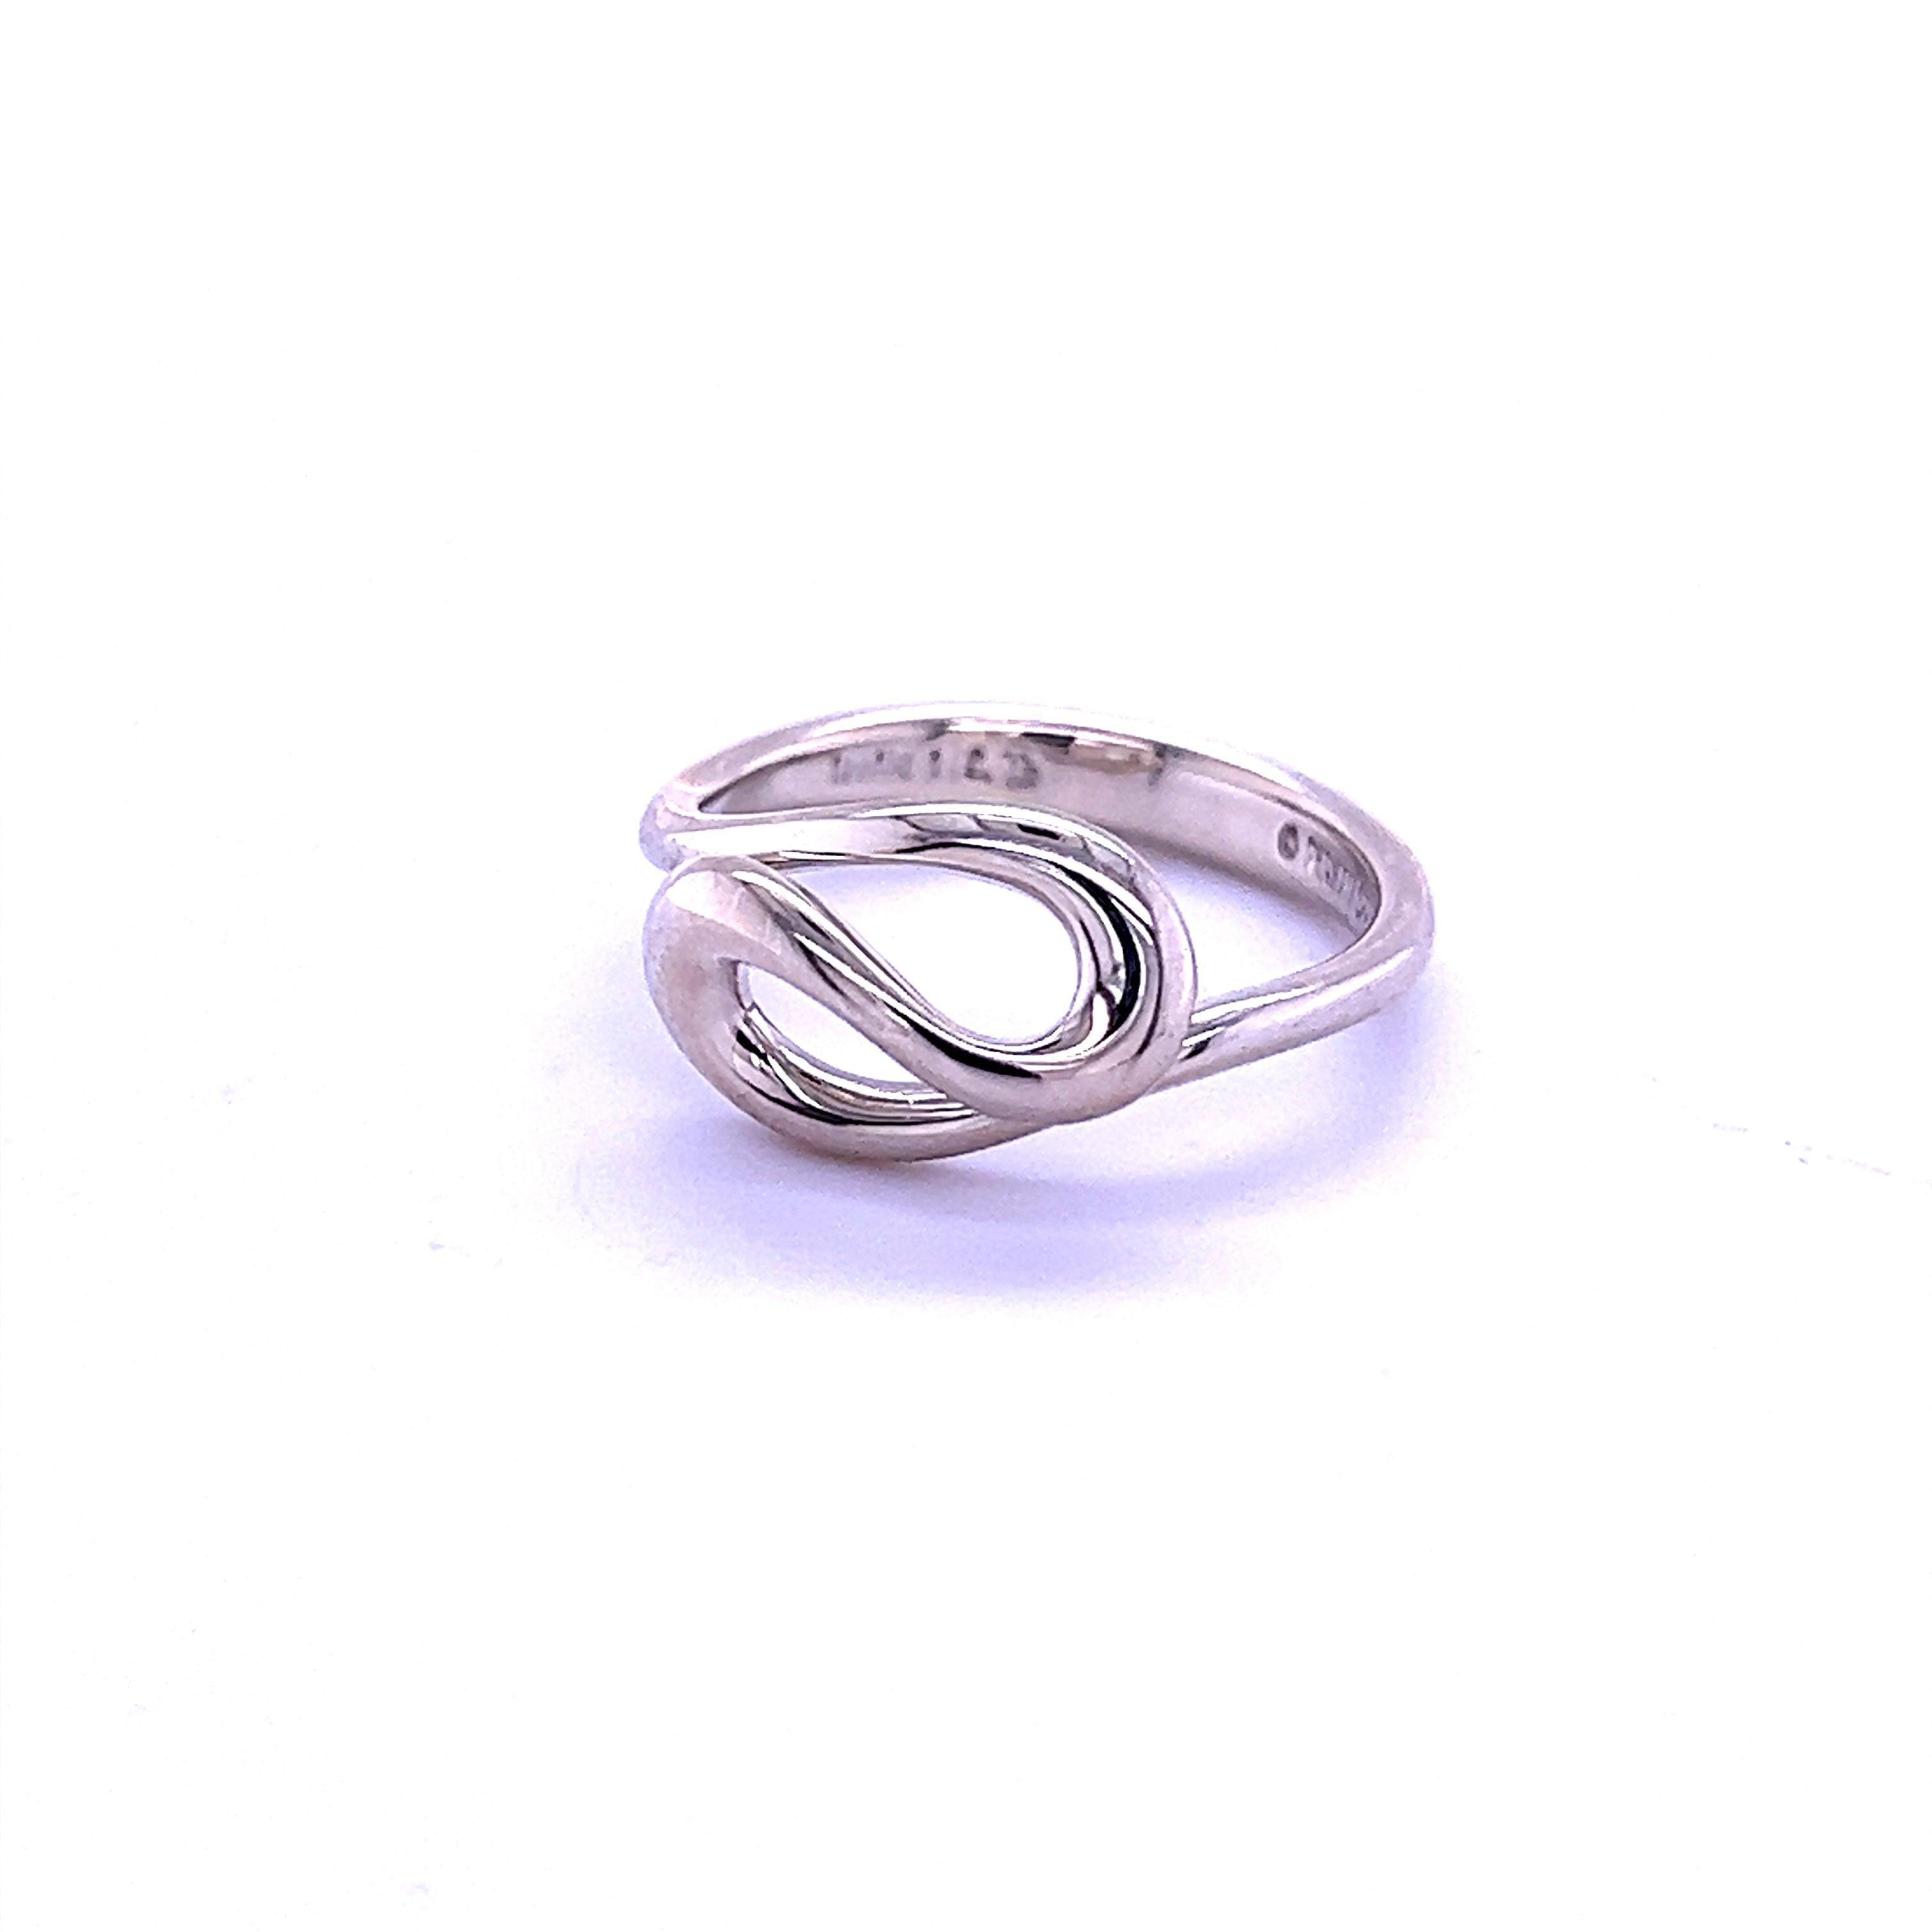 Tiffany & Co Estate Wave Ring Size 5.5 Silver By Elsa Peretti TIF511

TRUSTED SELLER SINCE 2002

DETAILS
Designer: Elsa Peretti
Style: Wave Band
Ring Size: 5.5
Weight: 2.7 Grams
Metal: Sterling Silver

We try to present our estate items as best as